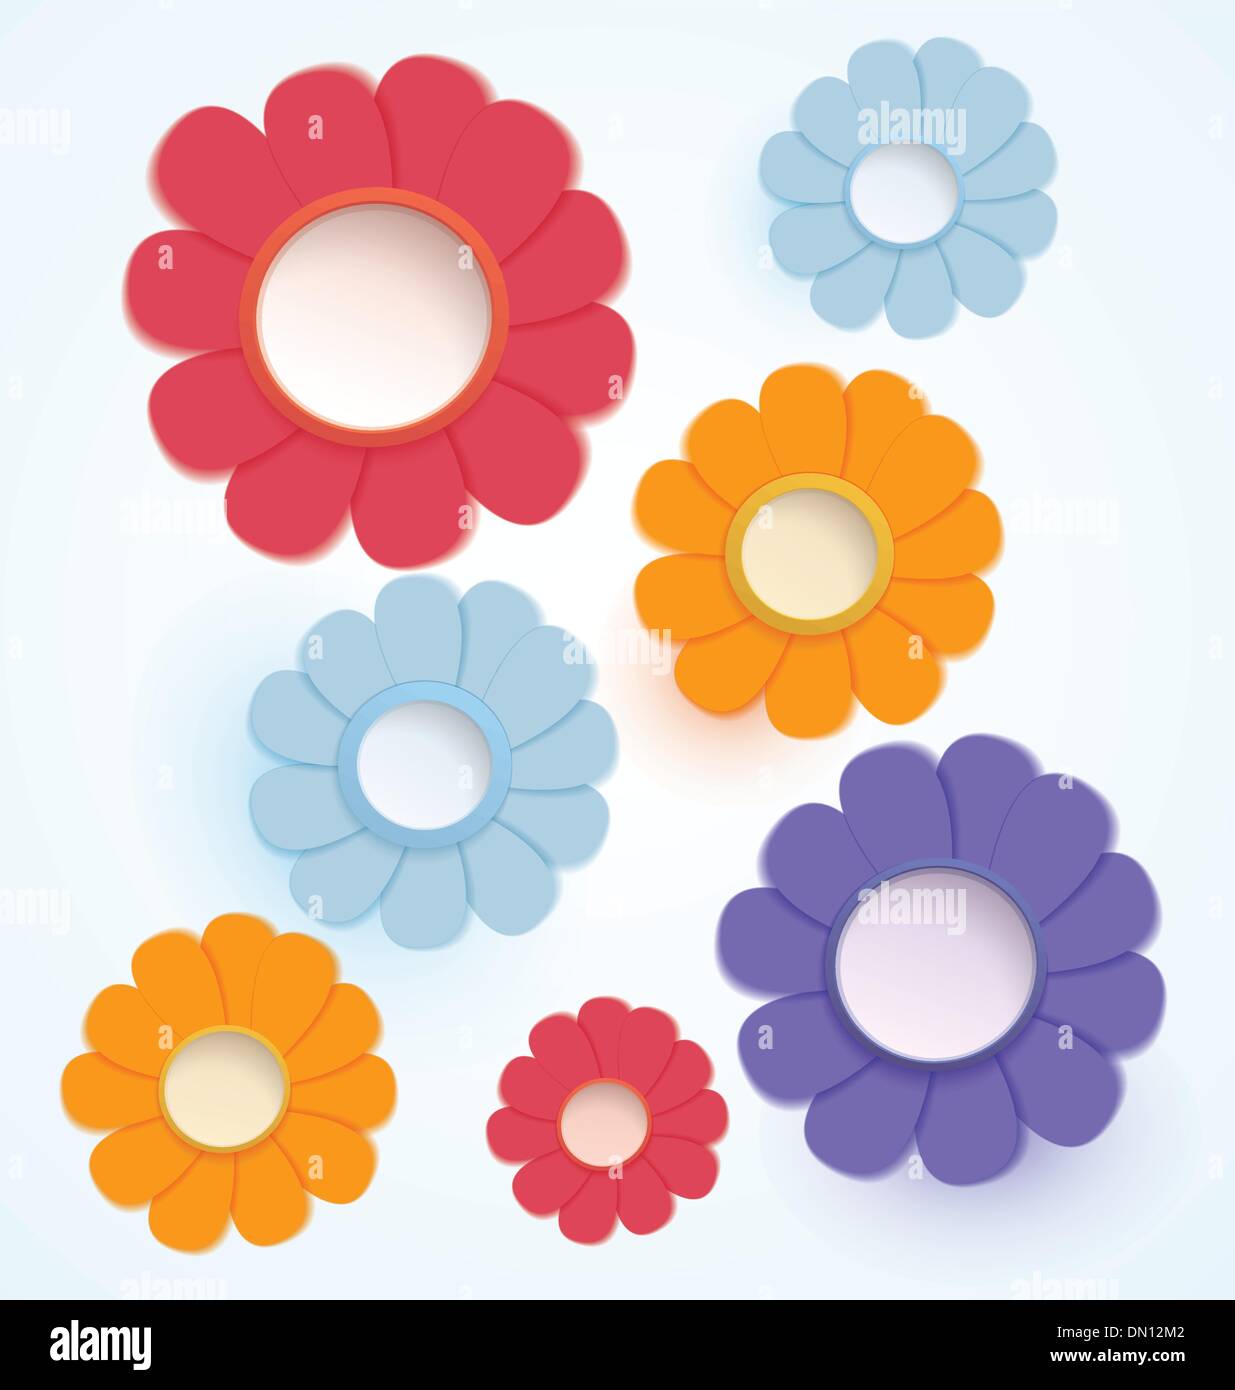 Flowers paper crafted Stock Vector